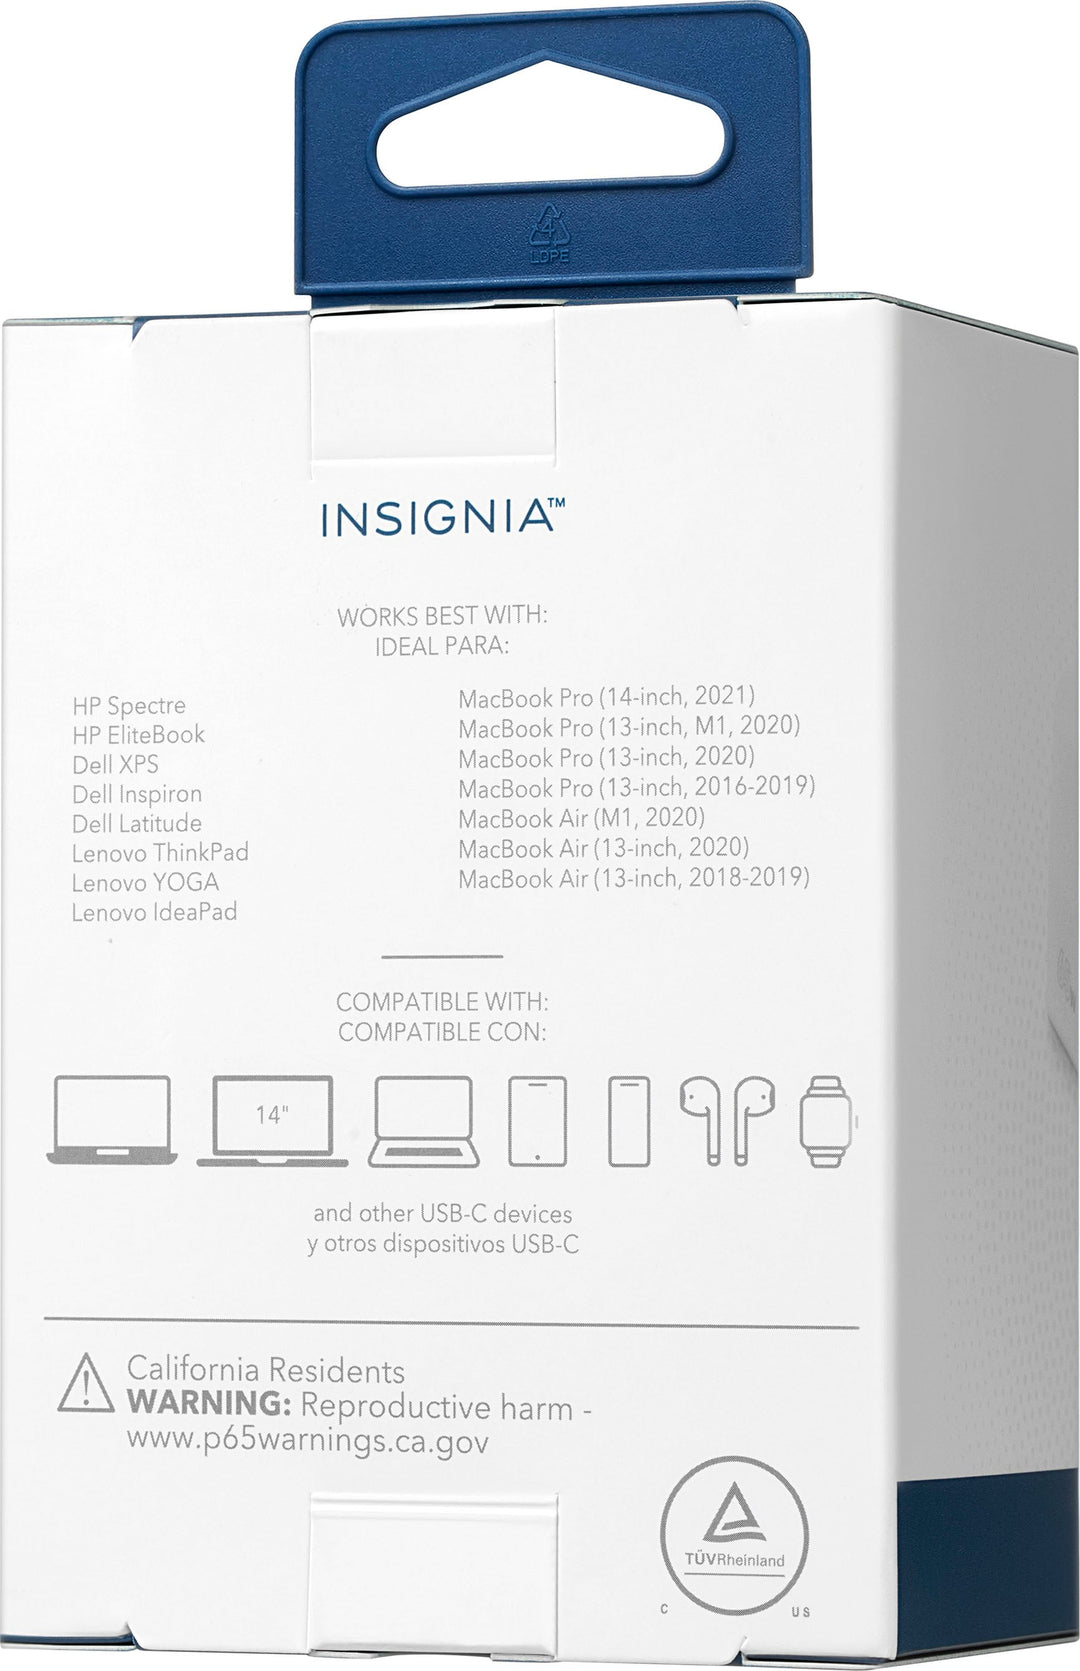 Insignia™ - 65W USB-C Compact Wall Charger for MacBook Pro, MacBook Air, and most USB-C Laptops - White_8